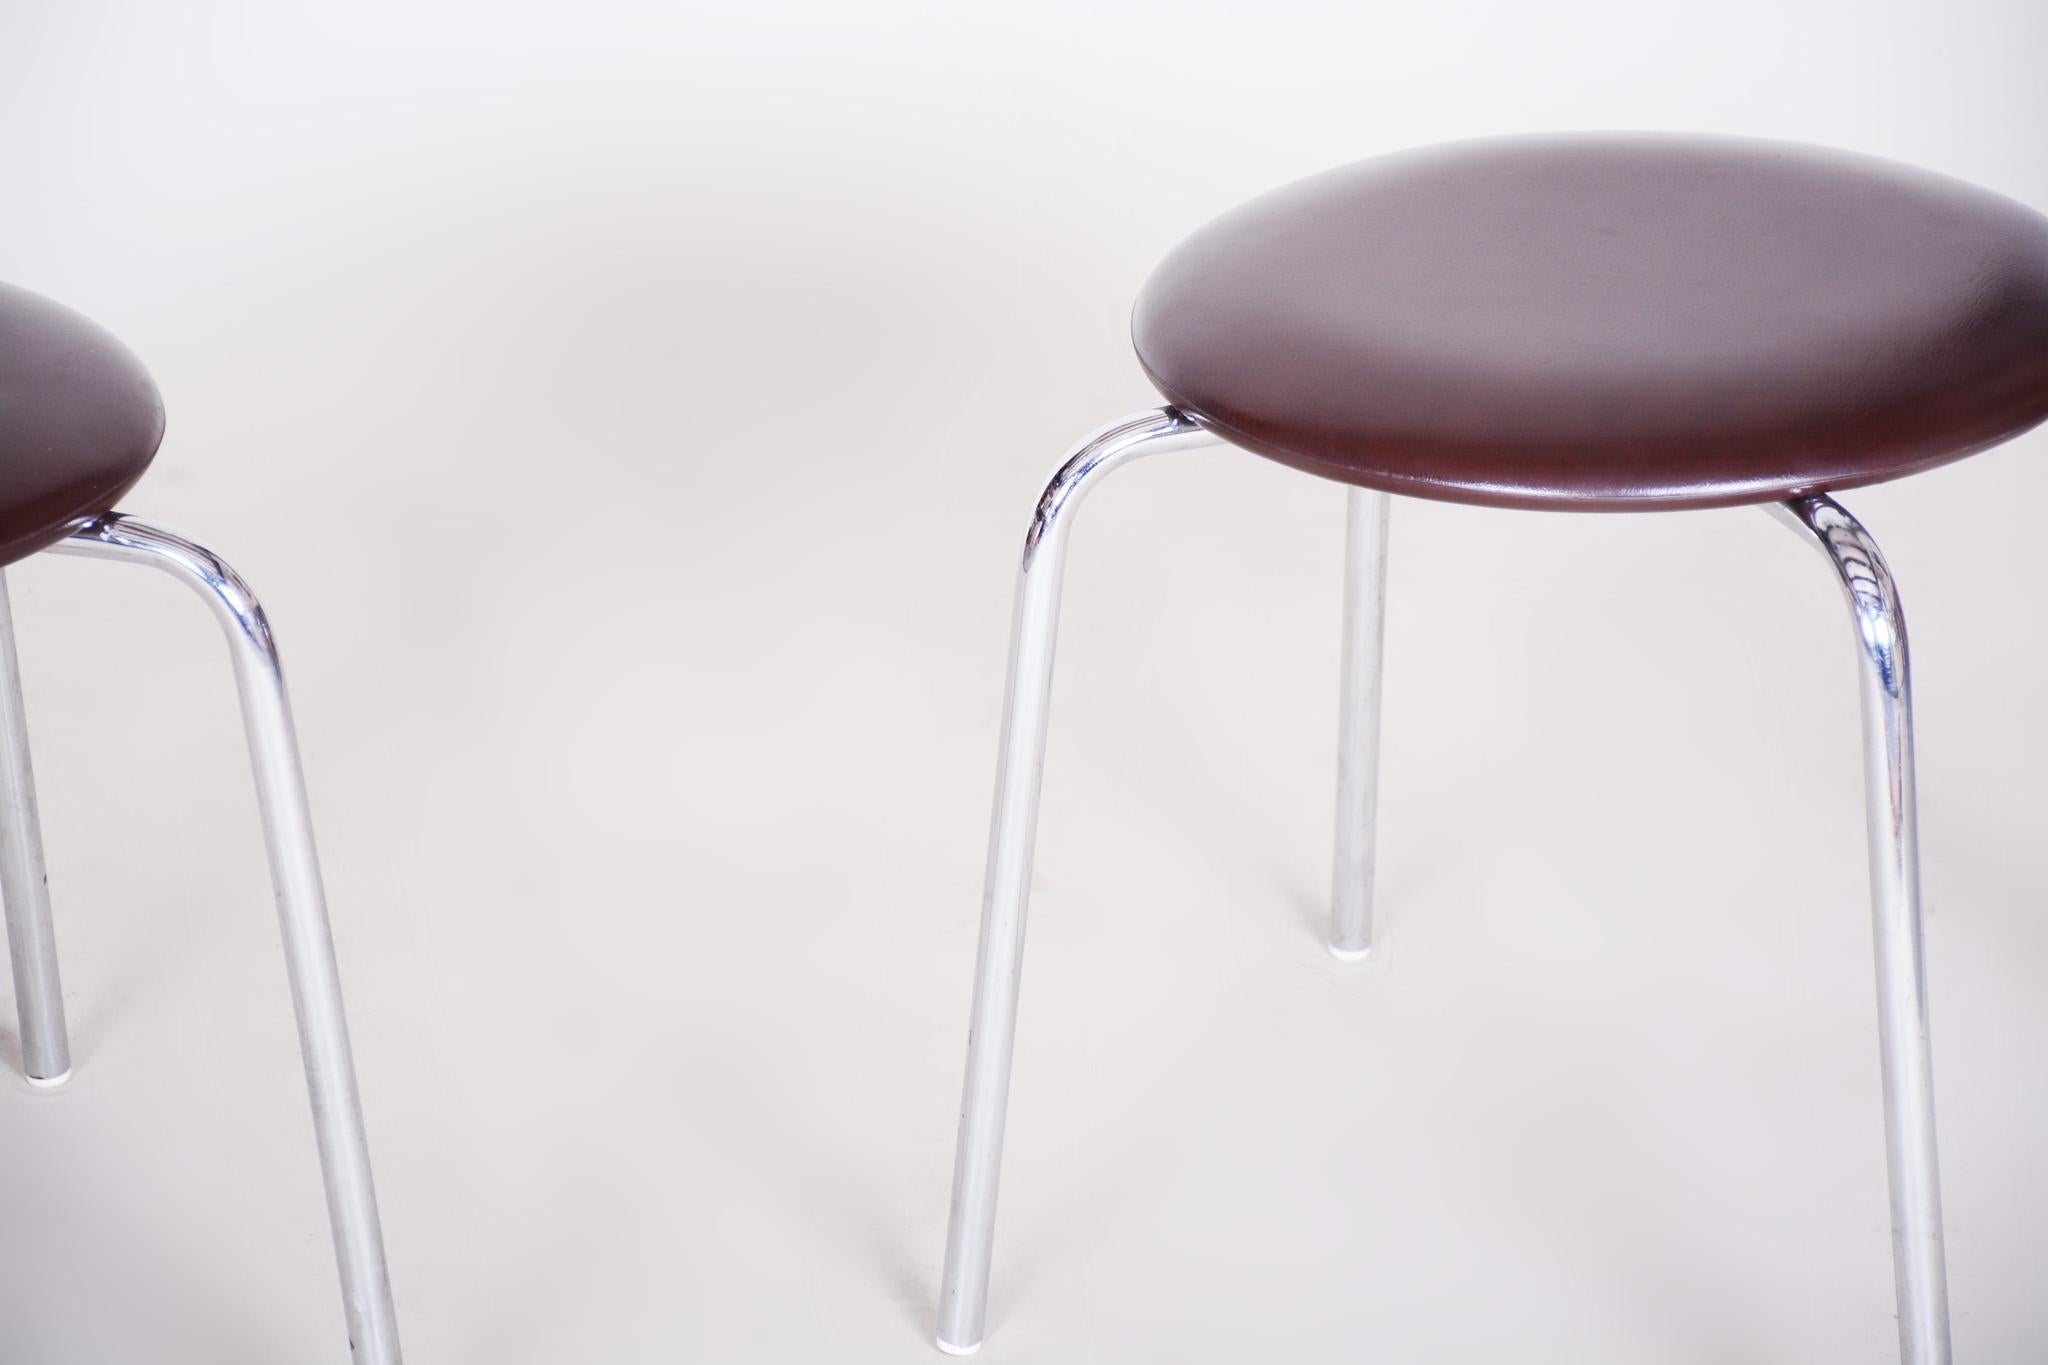 Mid-Century Modern Midcentury Steel and Leatherette Stools, 1960s, Original Condition For Sale